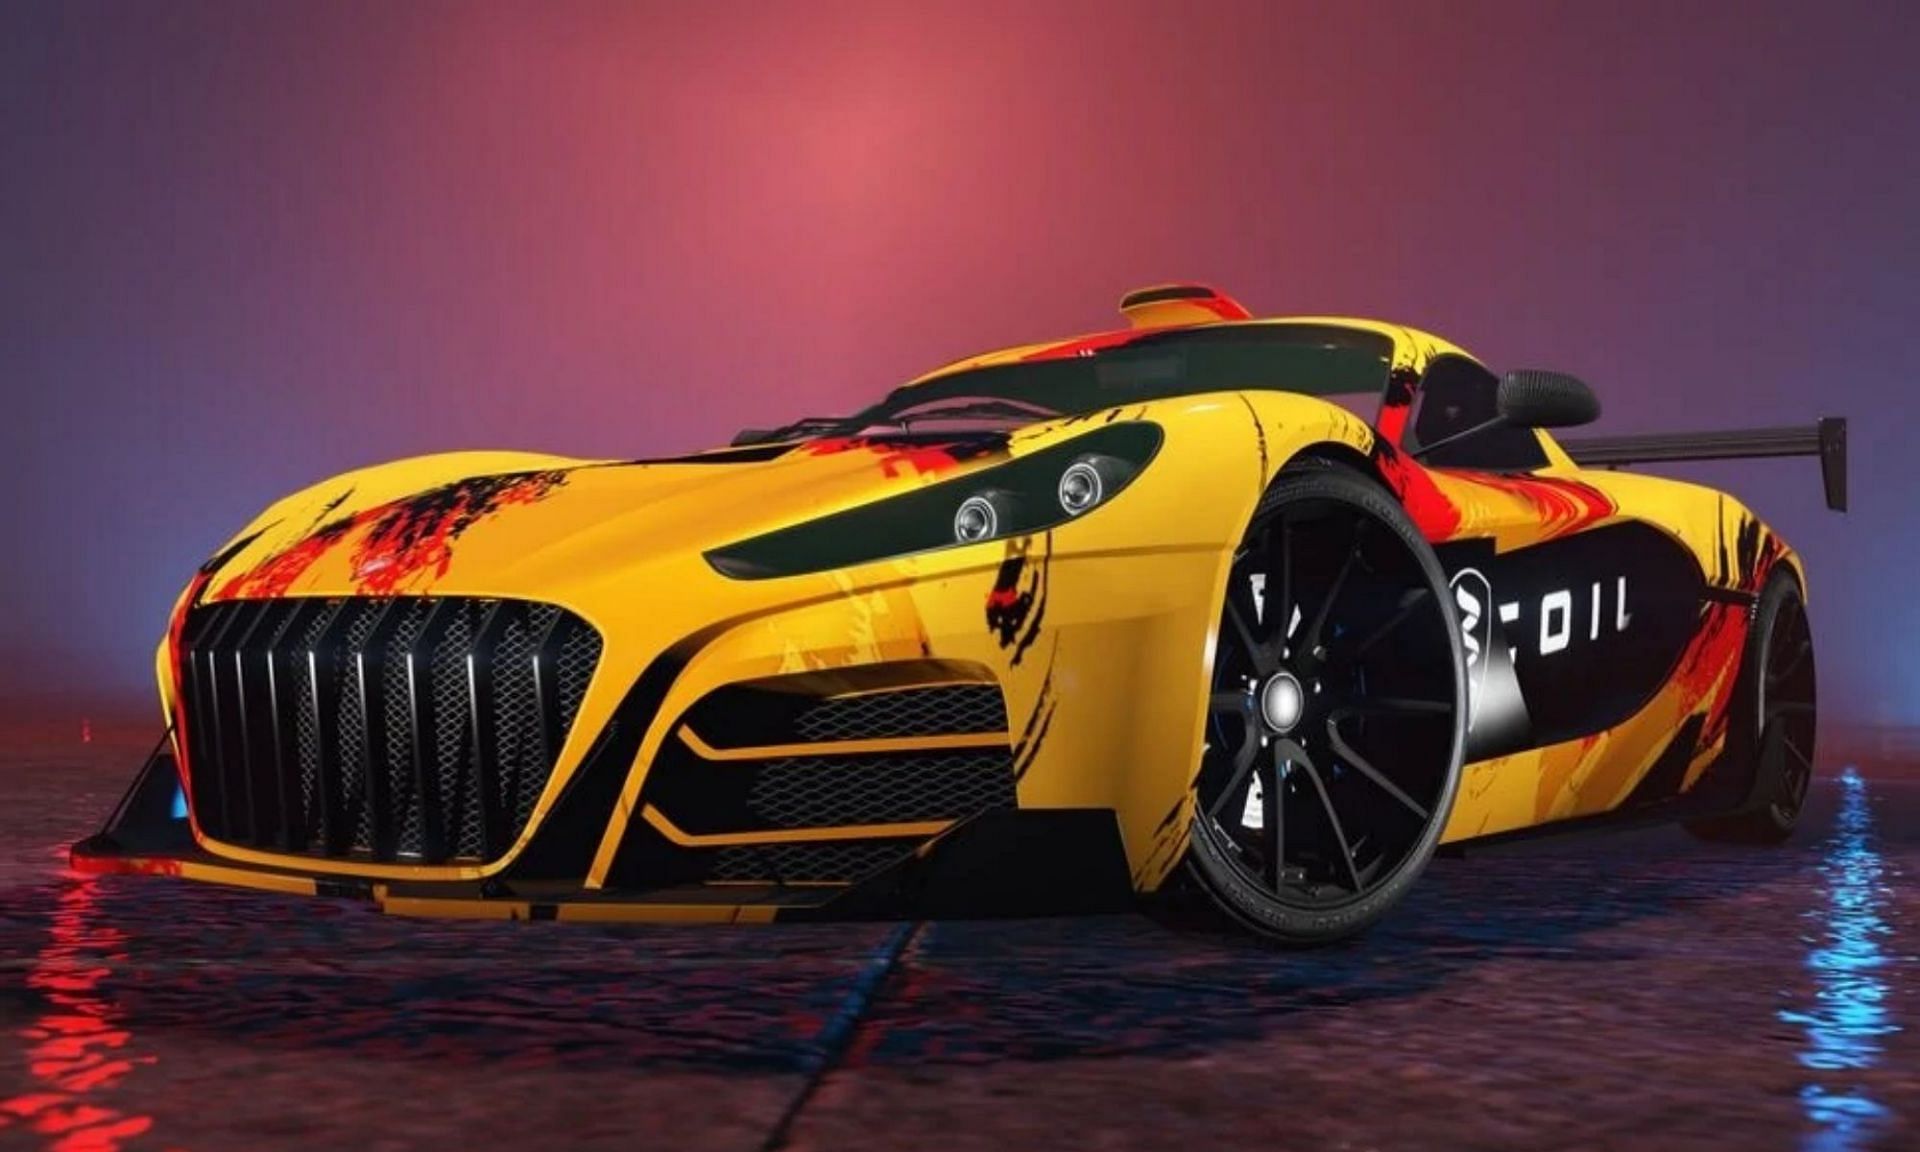 Yet another addition to the Cyclone series (Image via Rockstar Games)